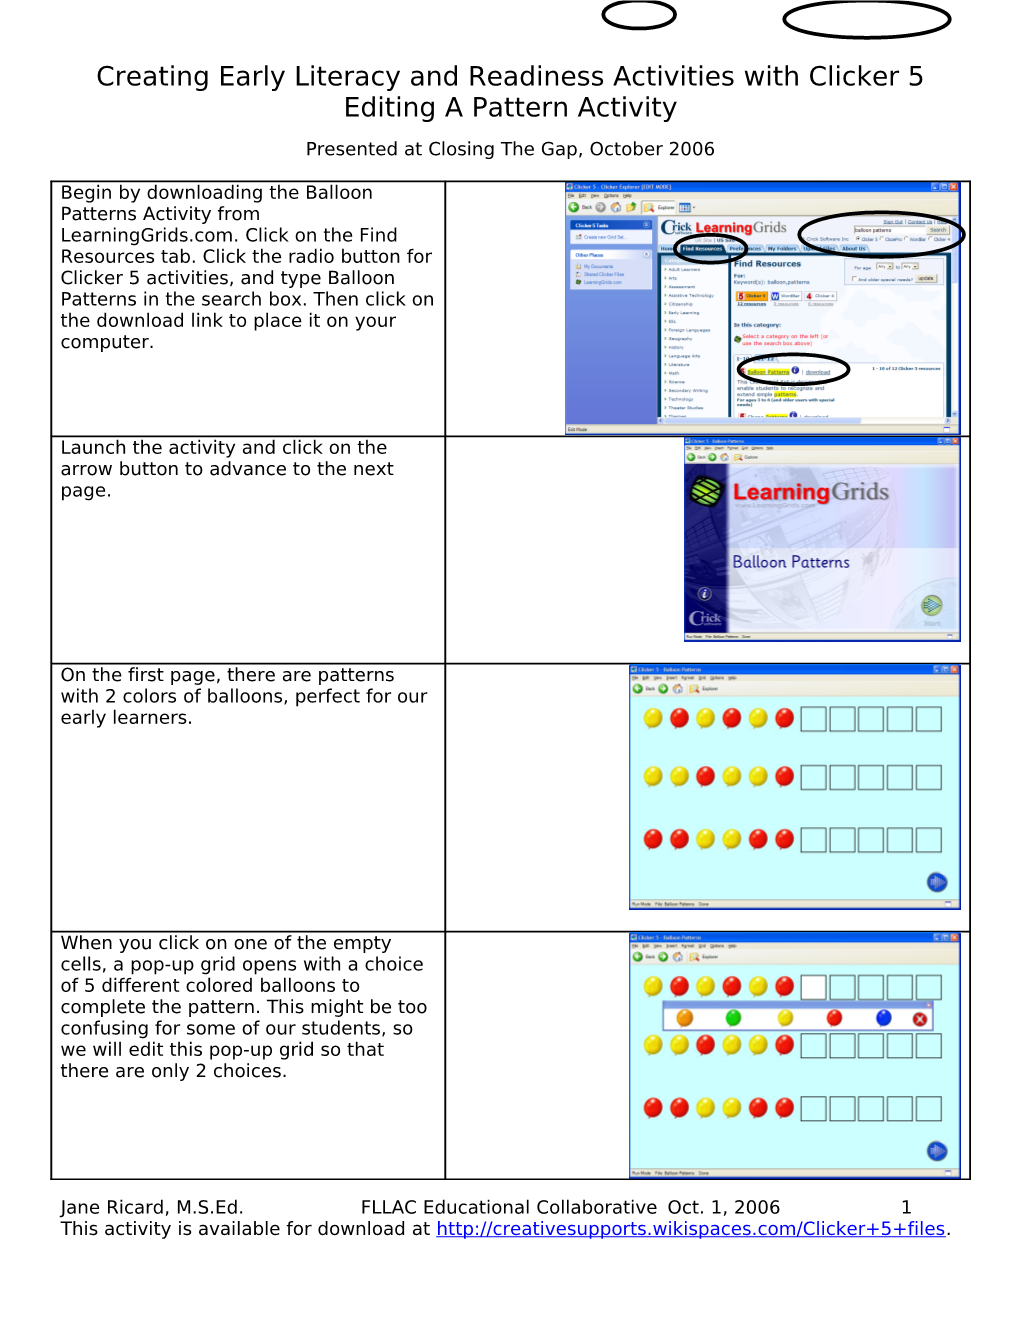 Creating Early Literacy and Readiness Activities with Clicker 5